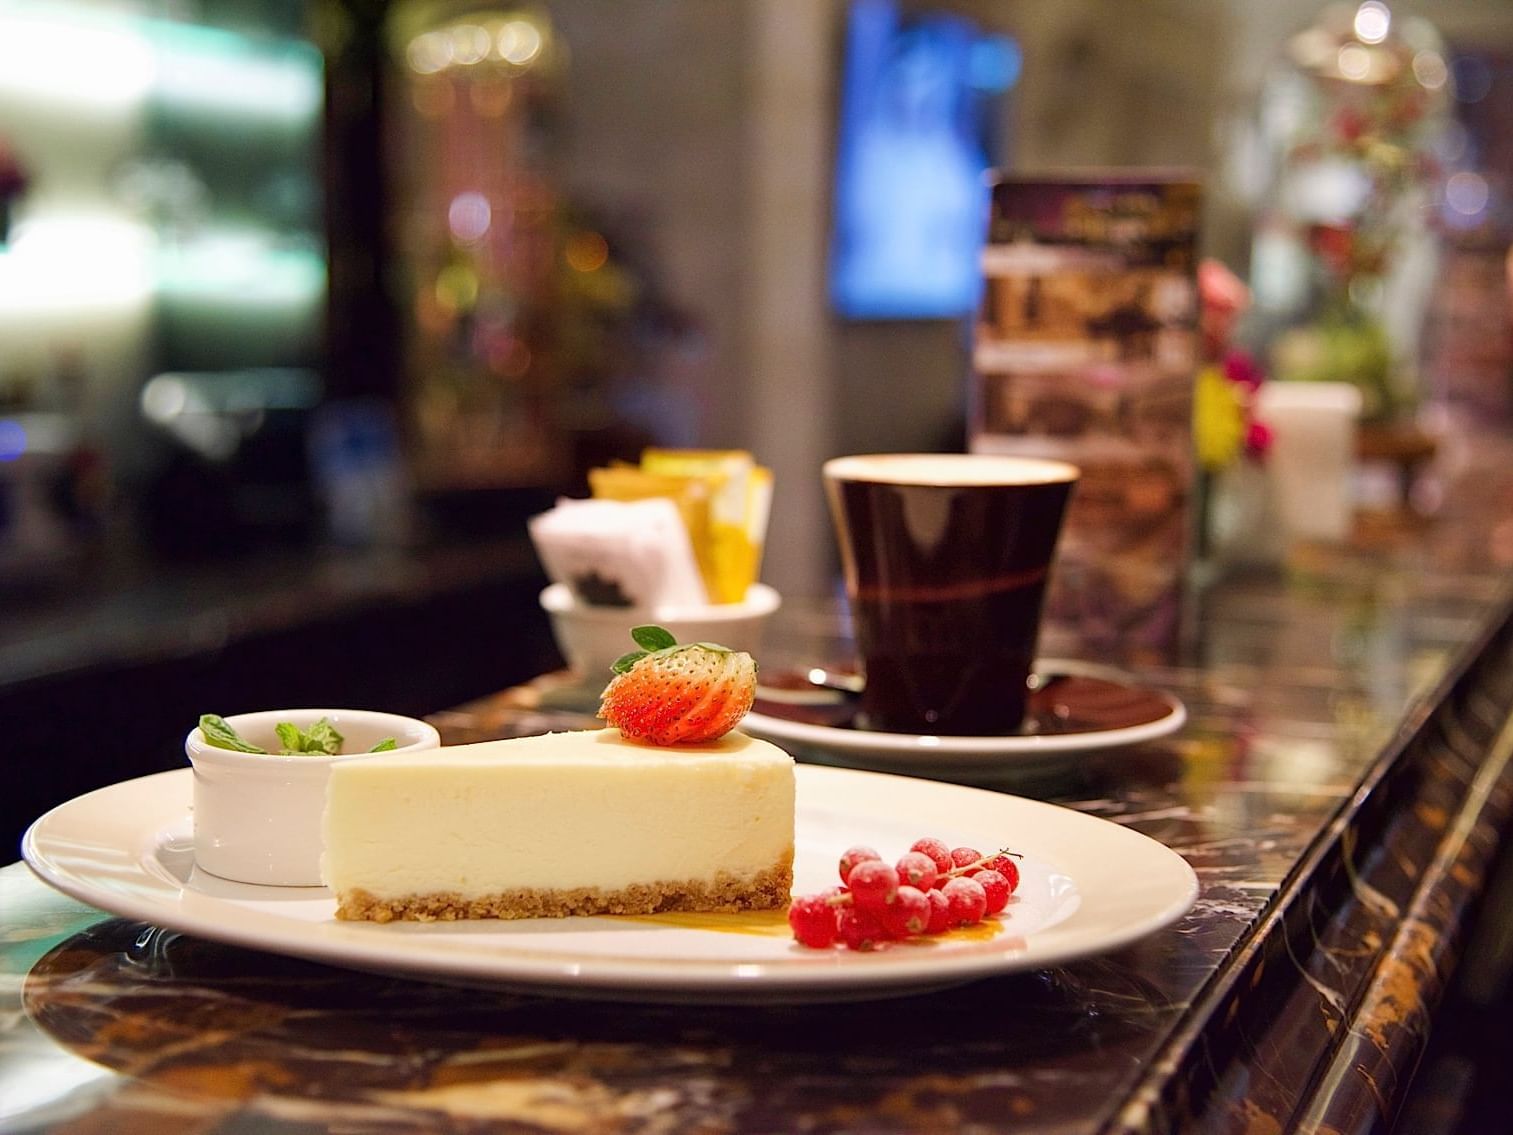 Cheese cake served in The Cove at Narcissus Hotel & Spa Riyadh